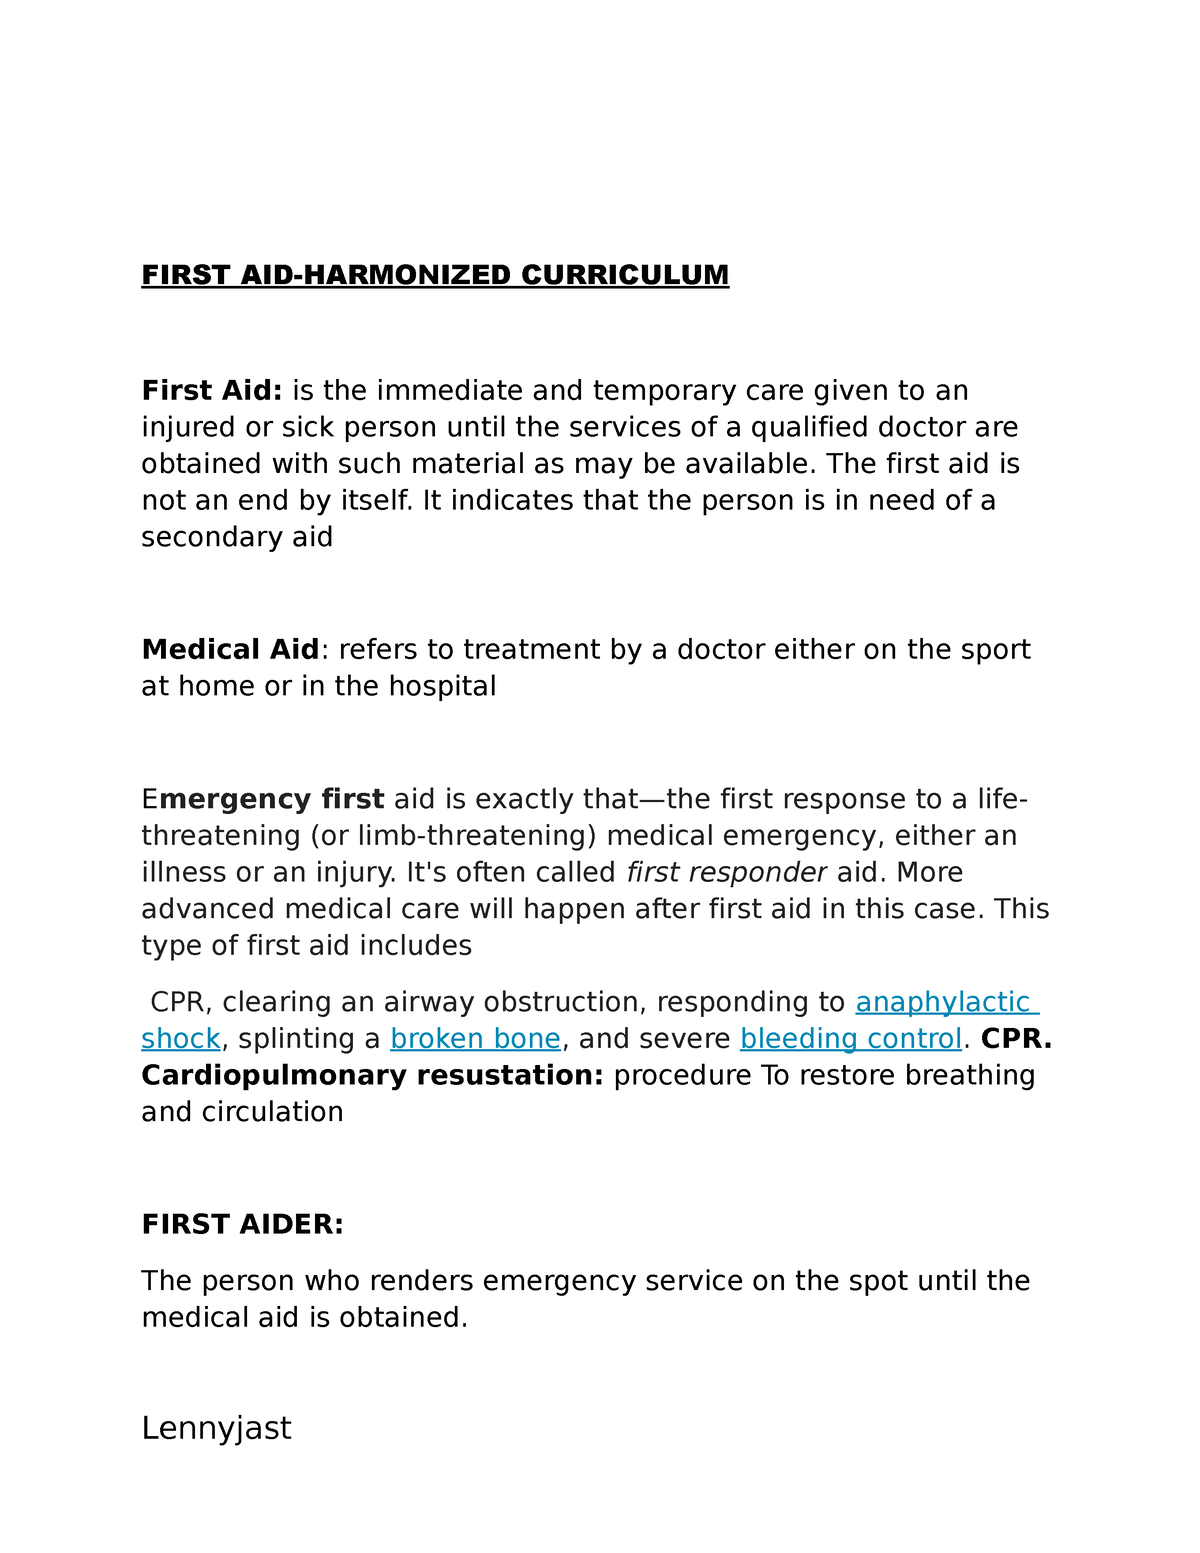 summary-of-introduction-to-first-aid